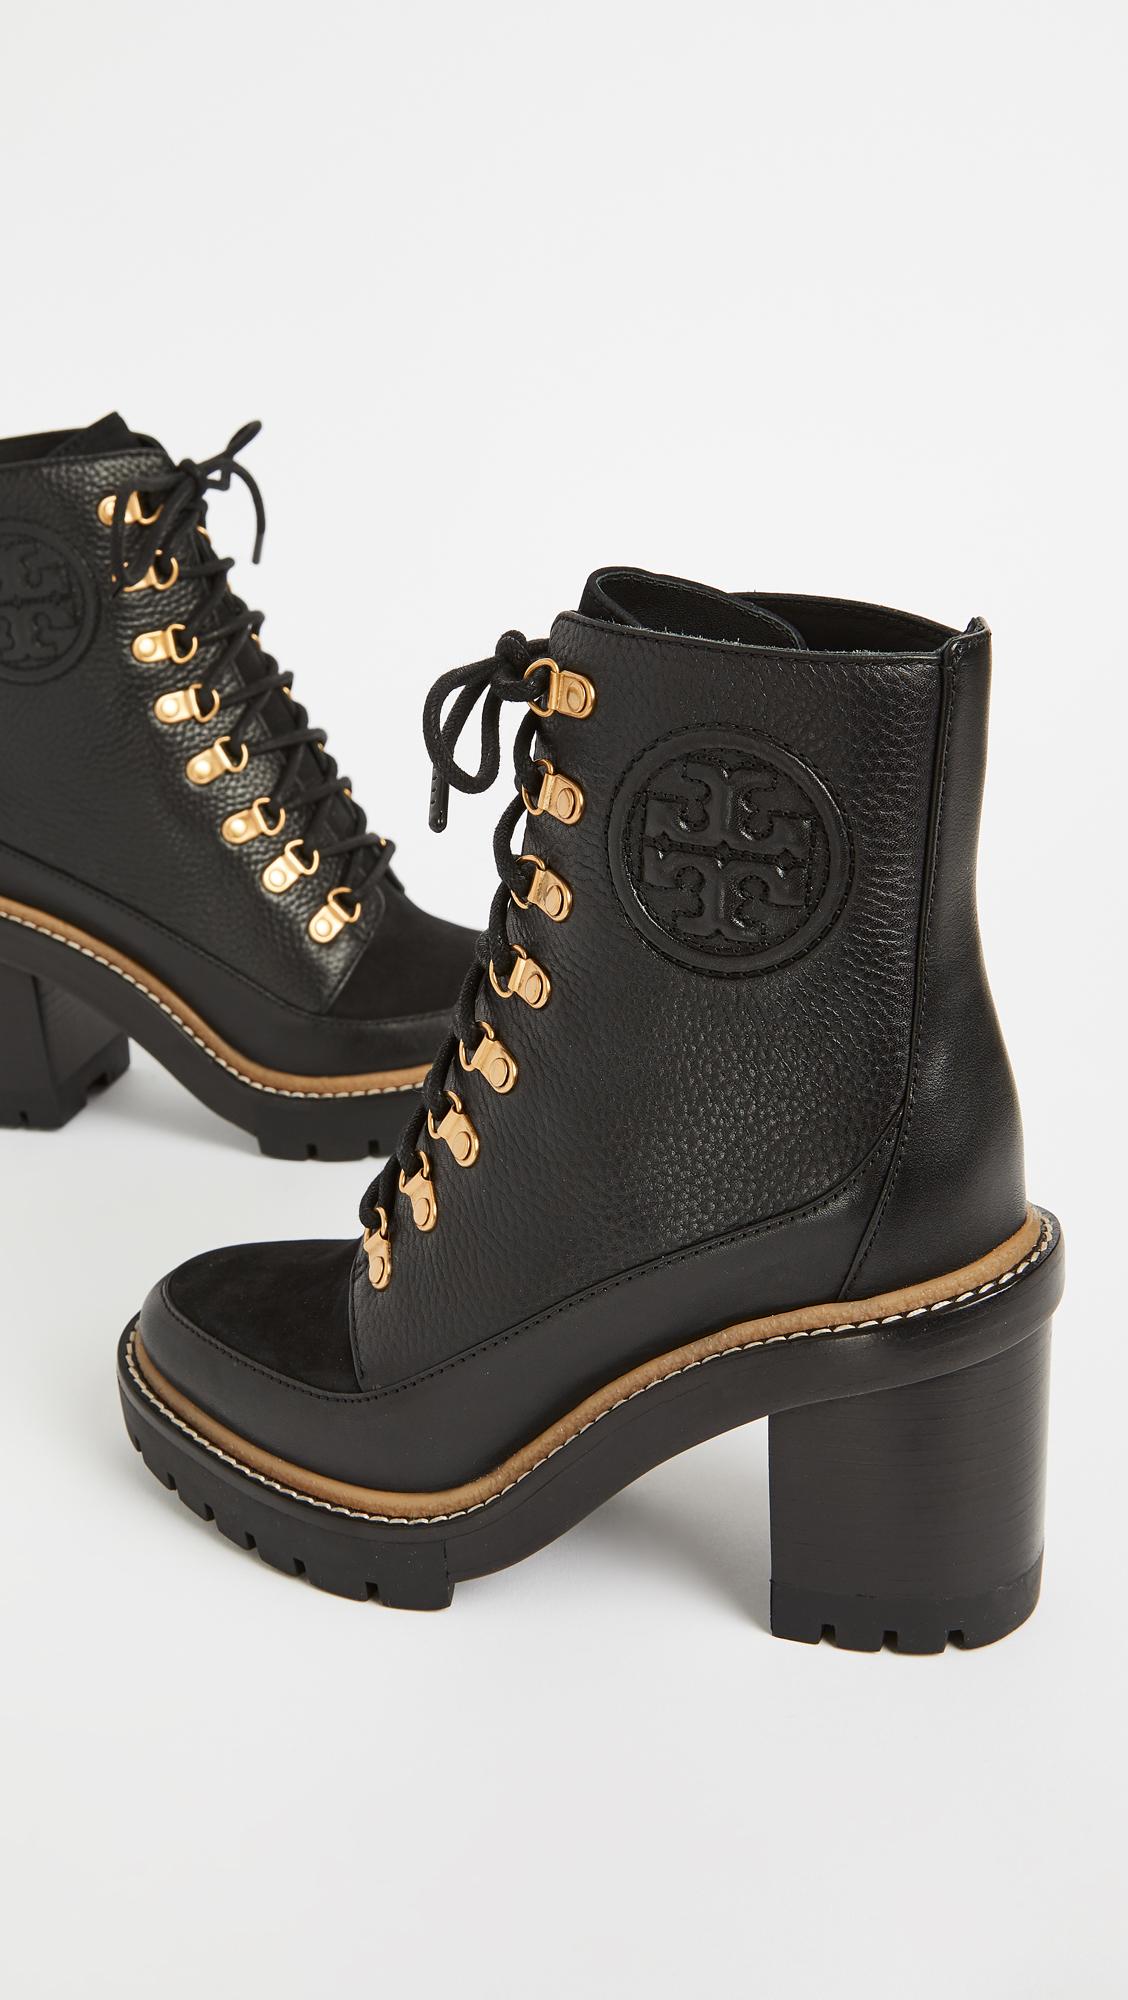 Tory Burch Leather Miller Mixed-materials Lug Sole Boot in Mid Tan 